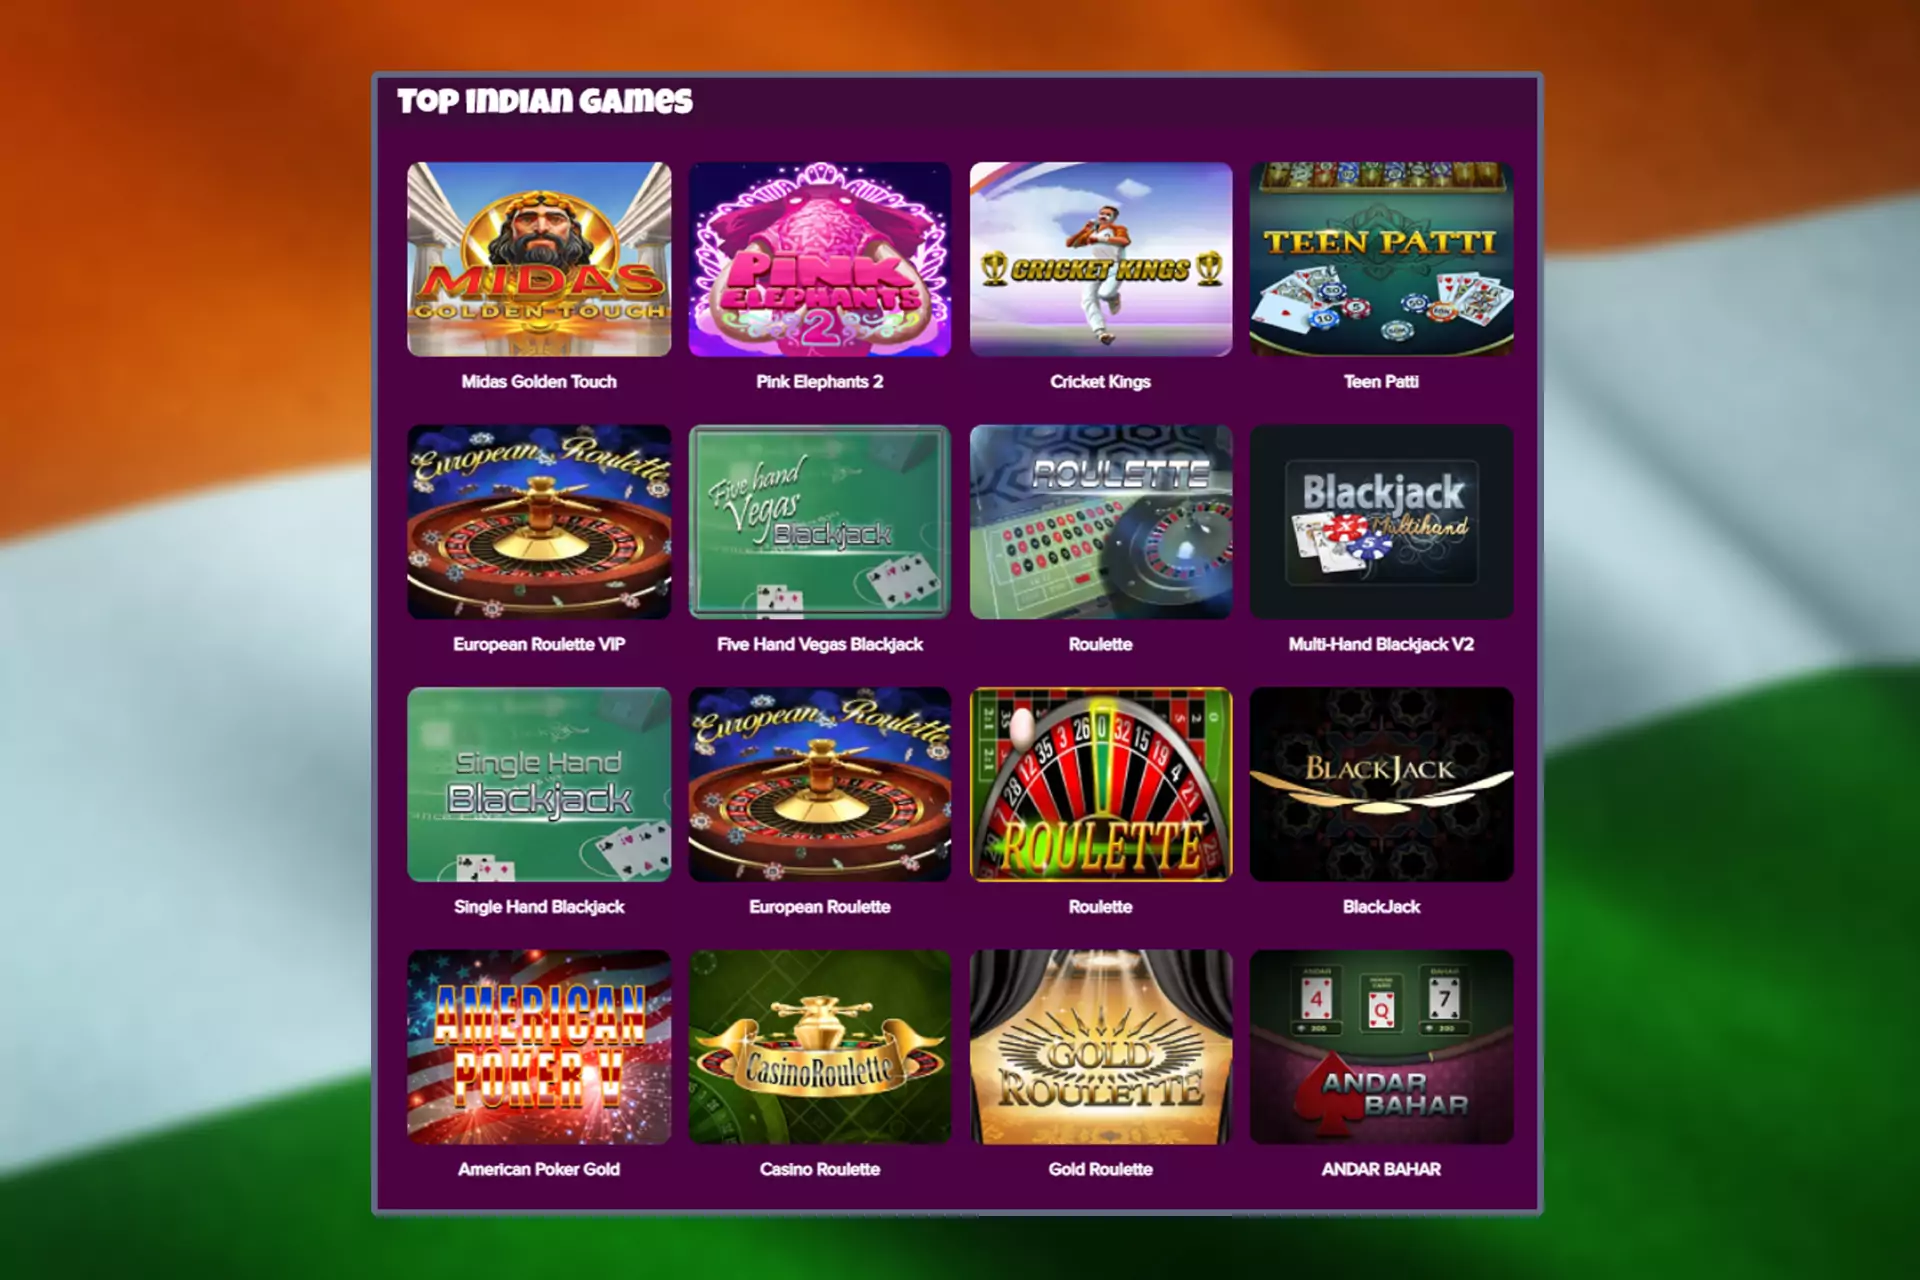 If you are a fan of traditional Indian games, go to the special section of the casino.